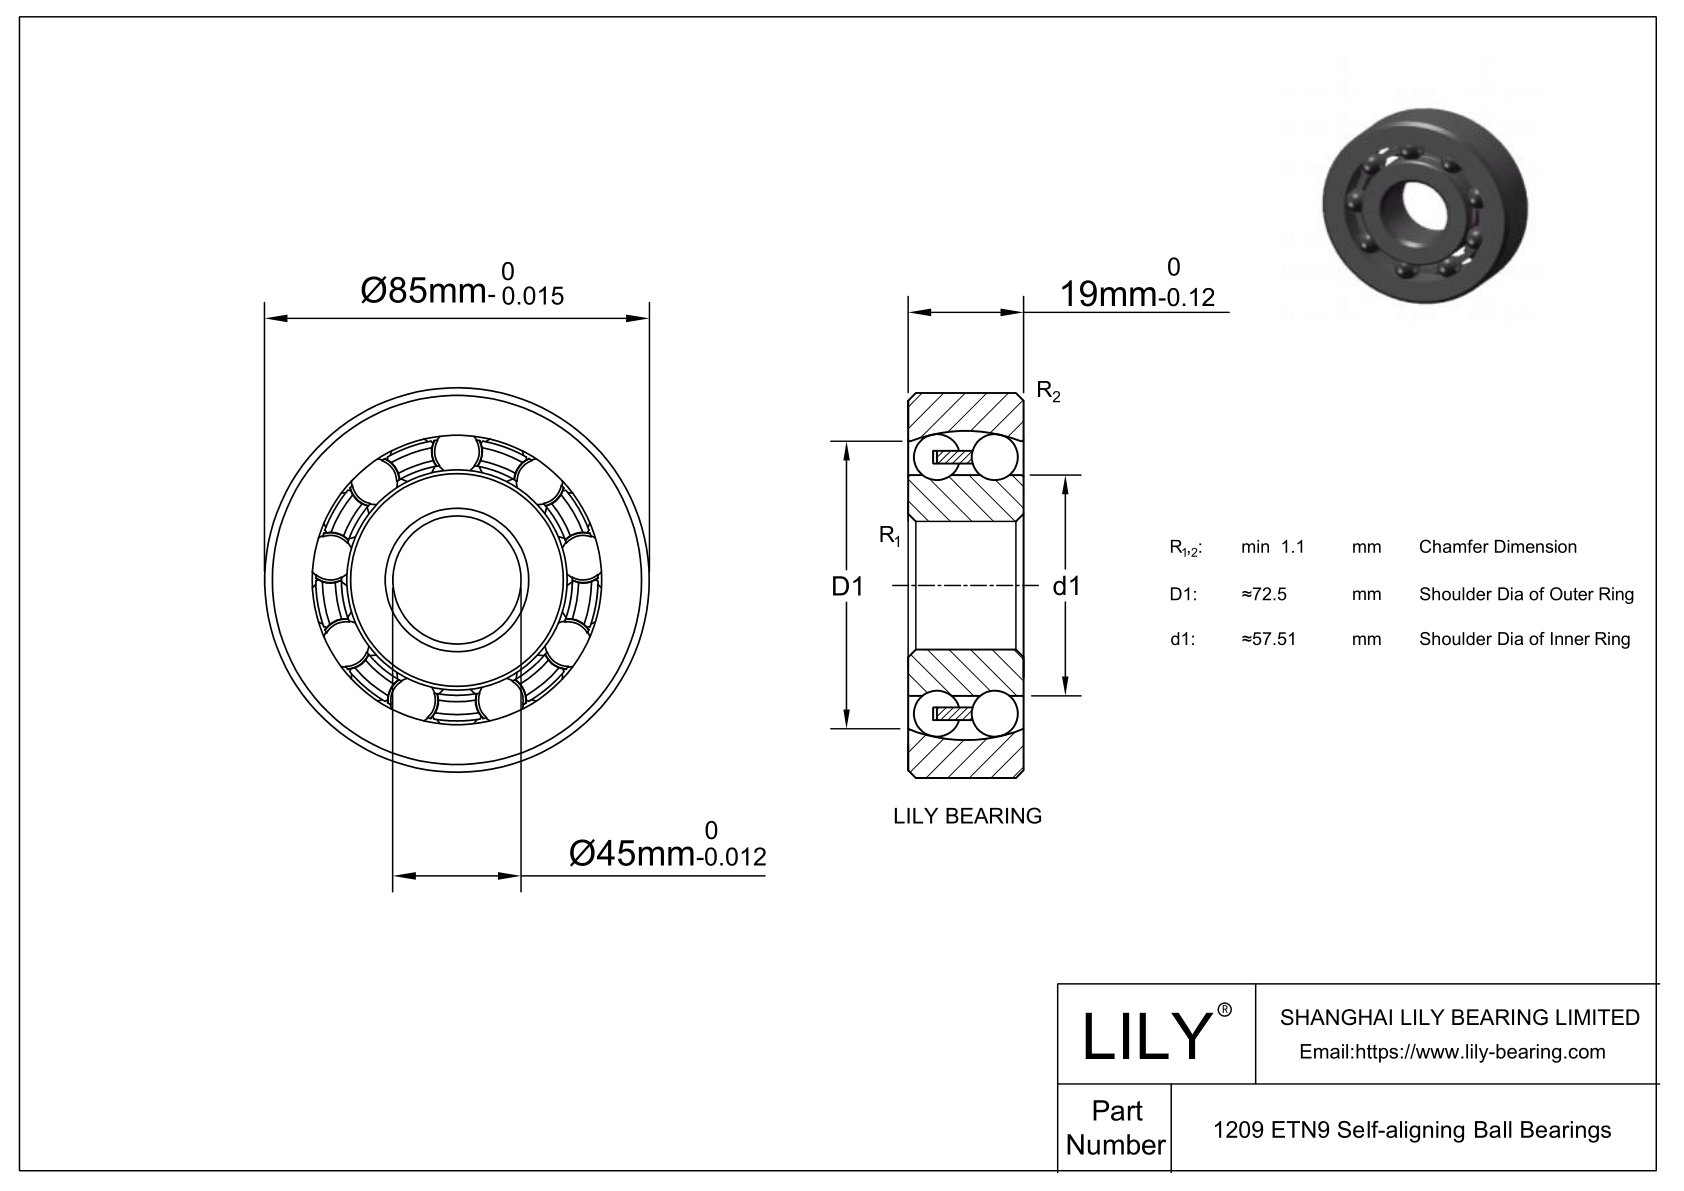 S1209 ETN9 Stainless Steel Self Aligning Ball Bearings cad drawing